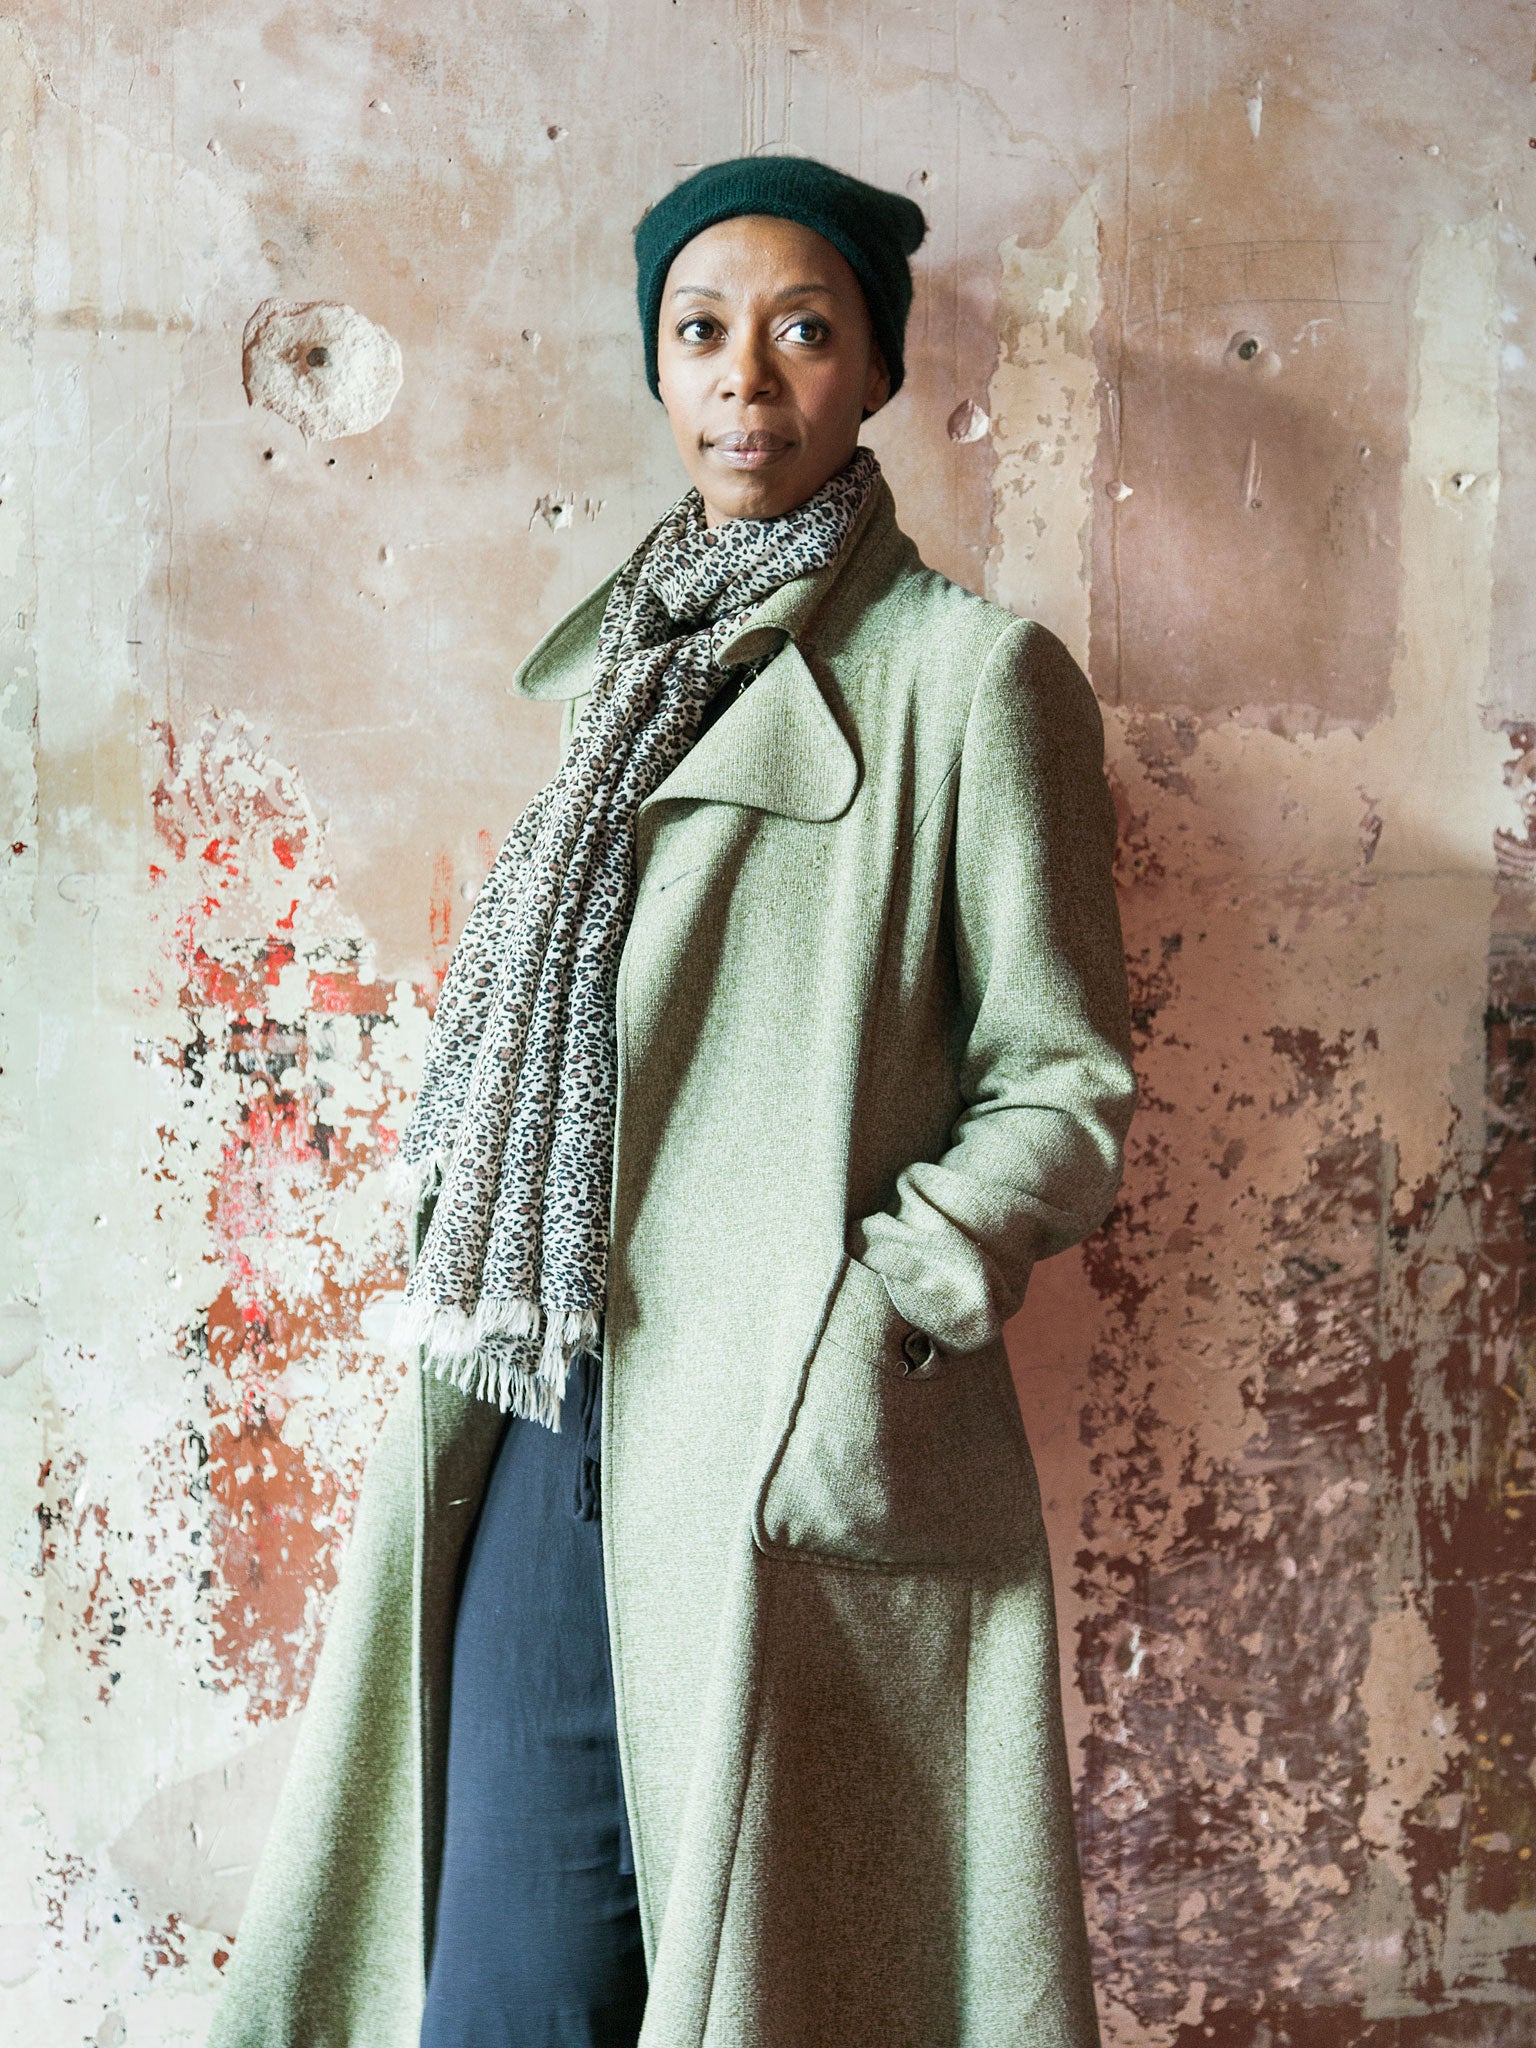 Actor Noma Dumezweni will play an adult Hermione Granger in the West End production of ‘Harry Potter and the Cursed Child’ from July